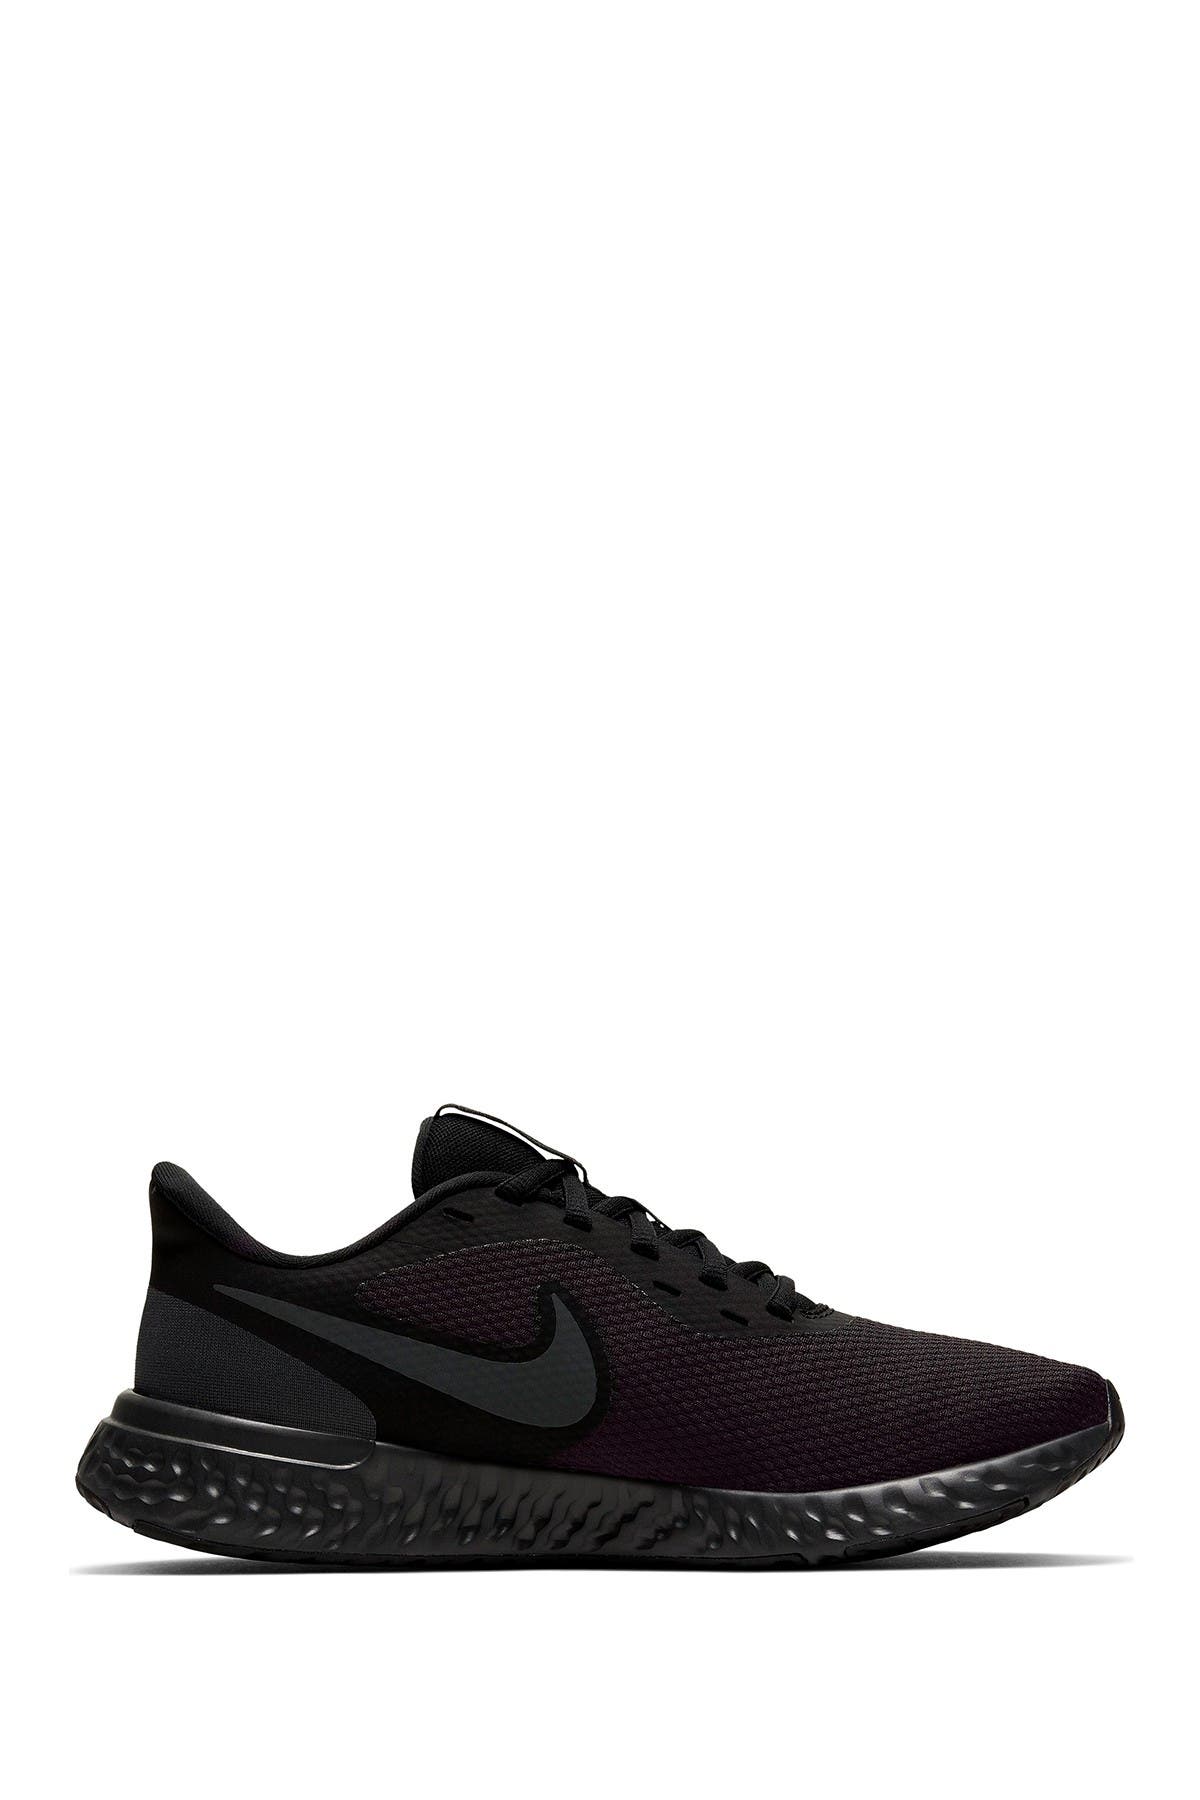 nordstrom womens nike running shoes